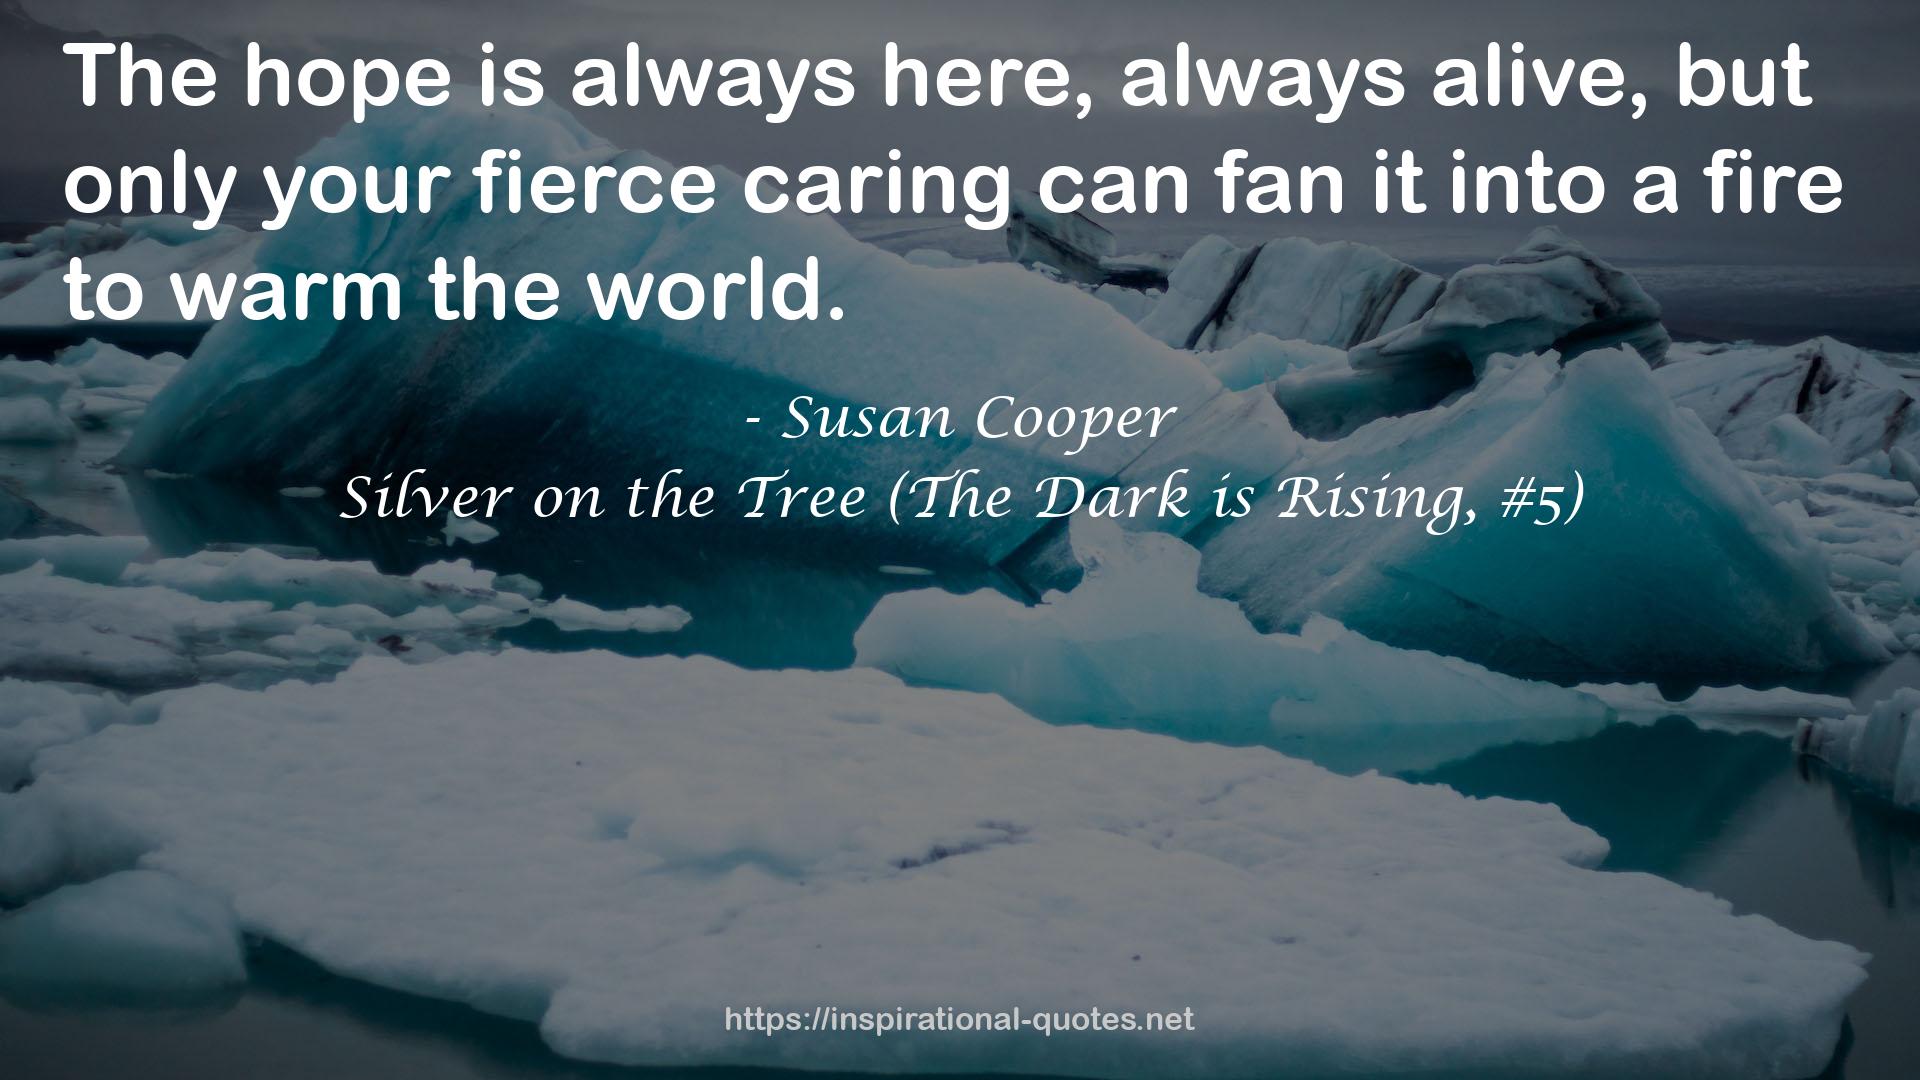 Silver on the Tree (The Dark is Rising, #5) QUOTES